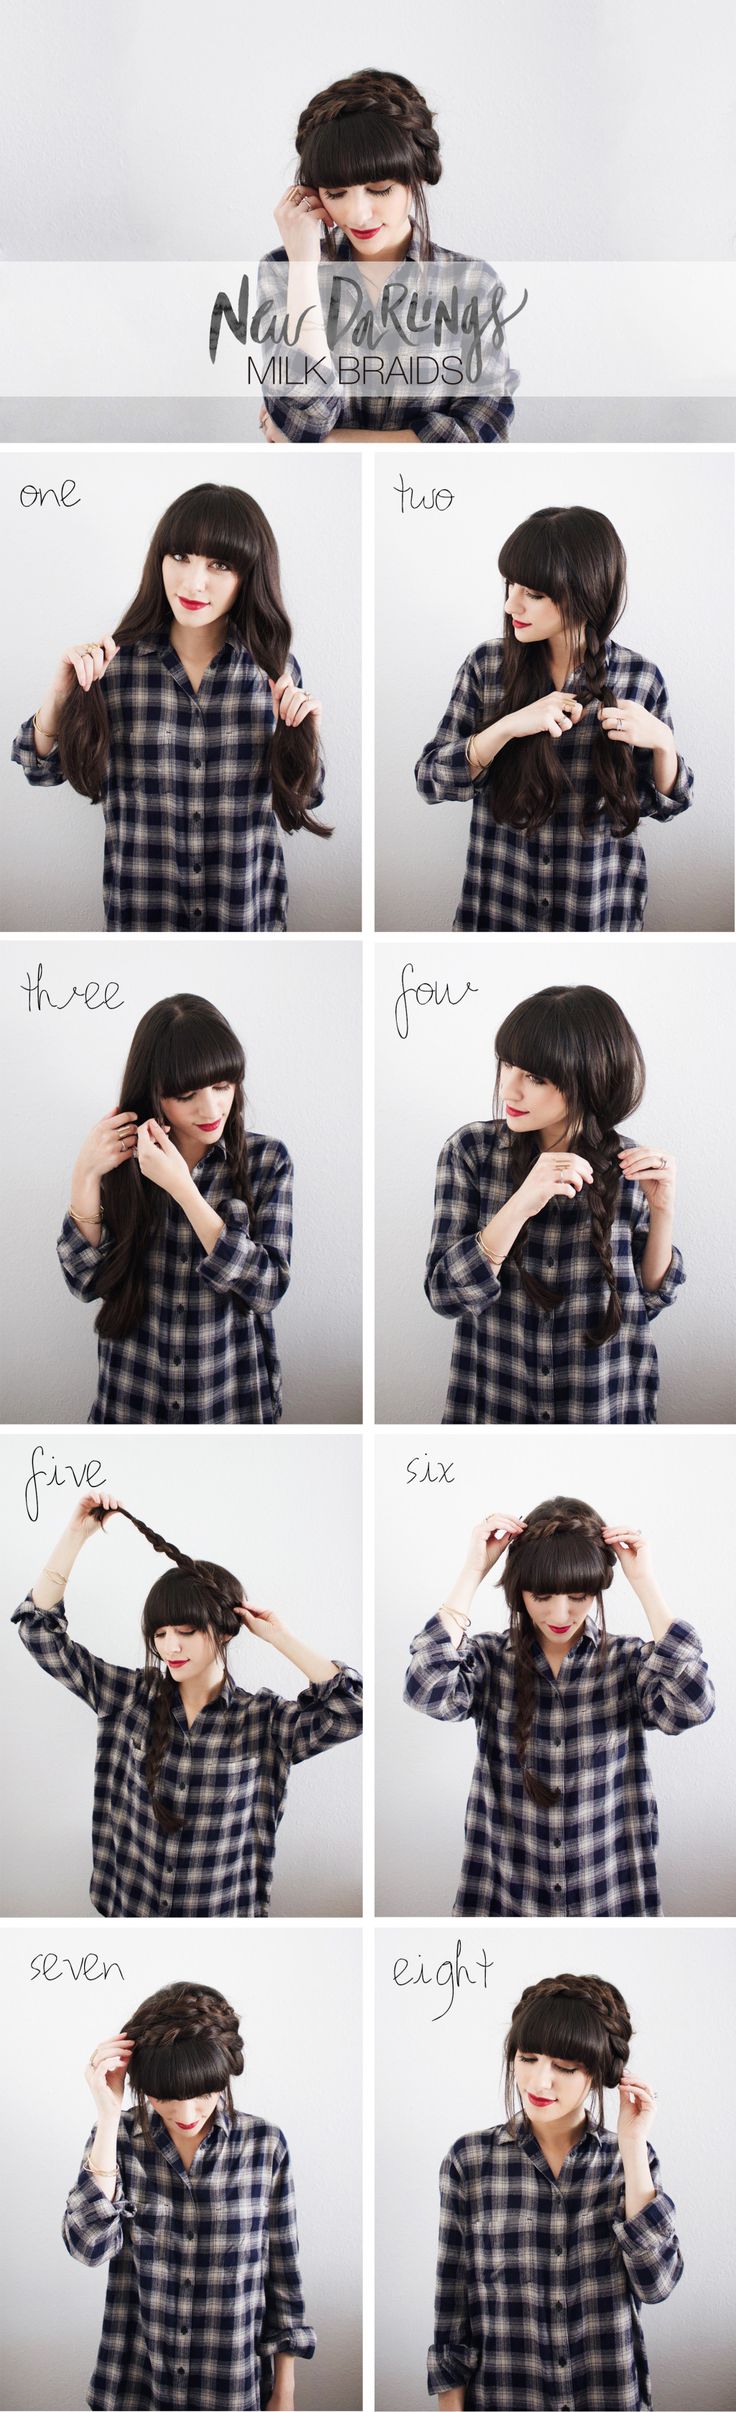 The model is showing how to make Stylish Milkmaid Braid.